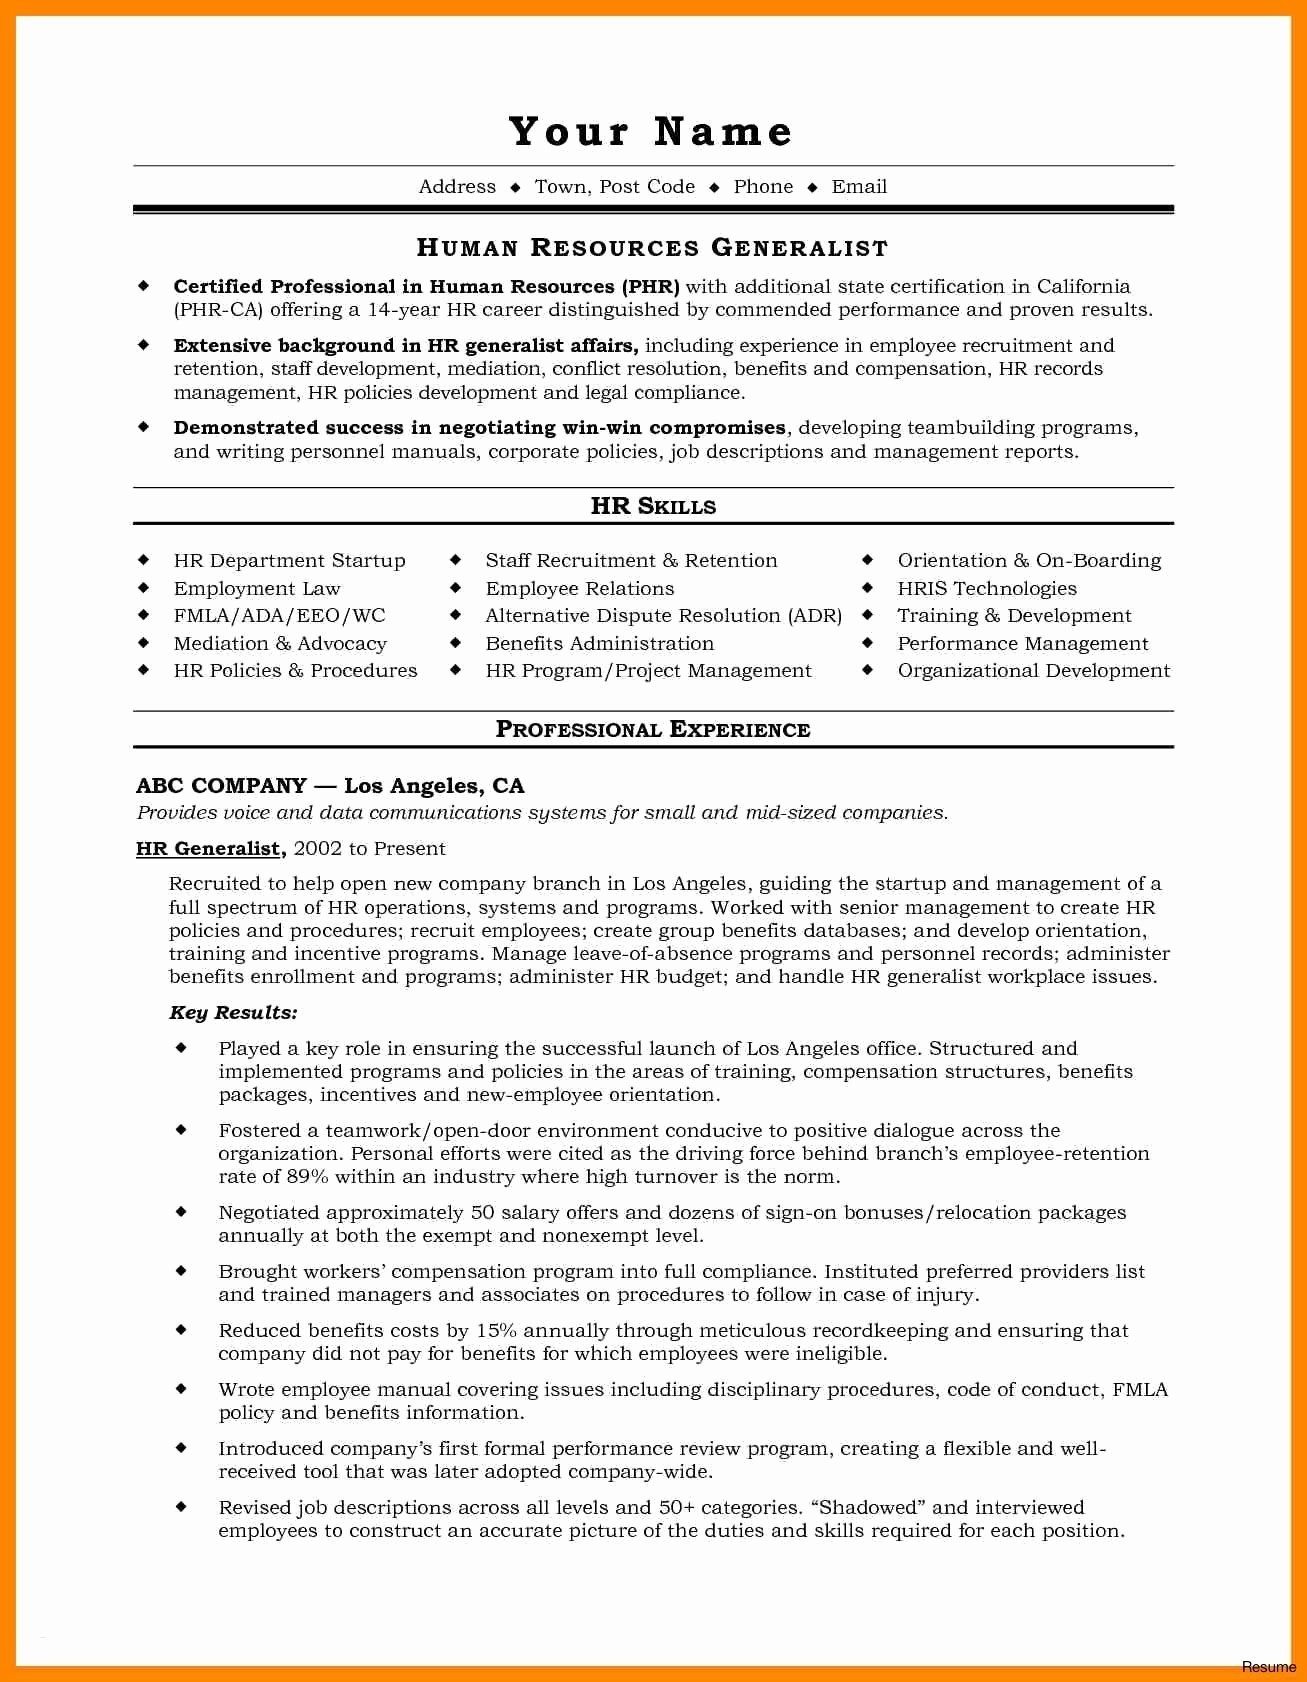 How To Write Resume How To Write A Profile For A Resume Awesome Good Resumes Examples Lovely Sample Simple Resume Lovely Example A Of How To Write A Profile For A Resume how to write resume|wikiresume.com